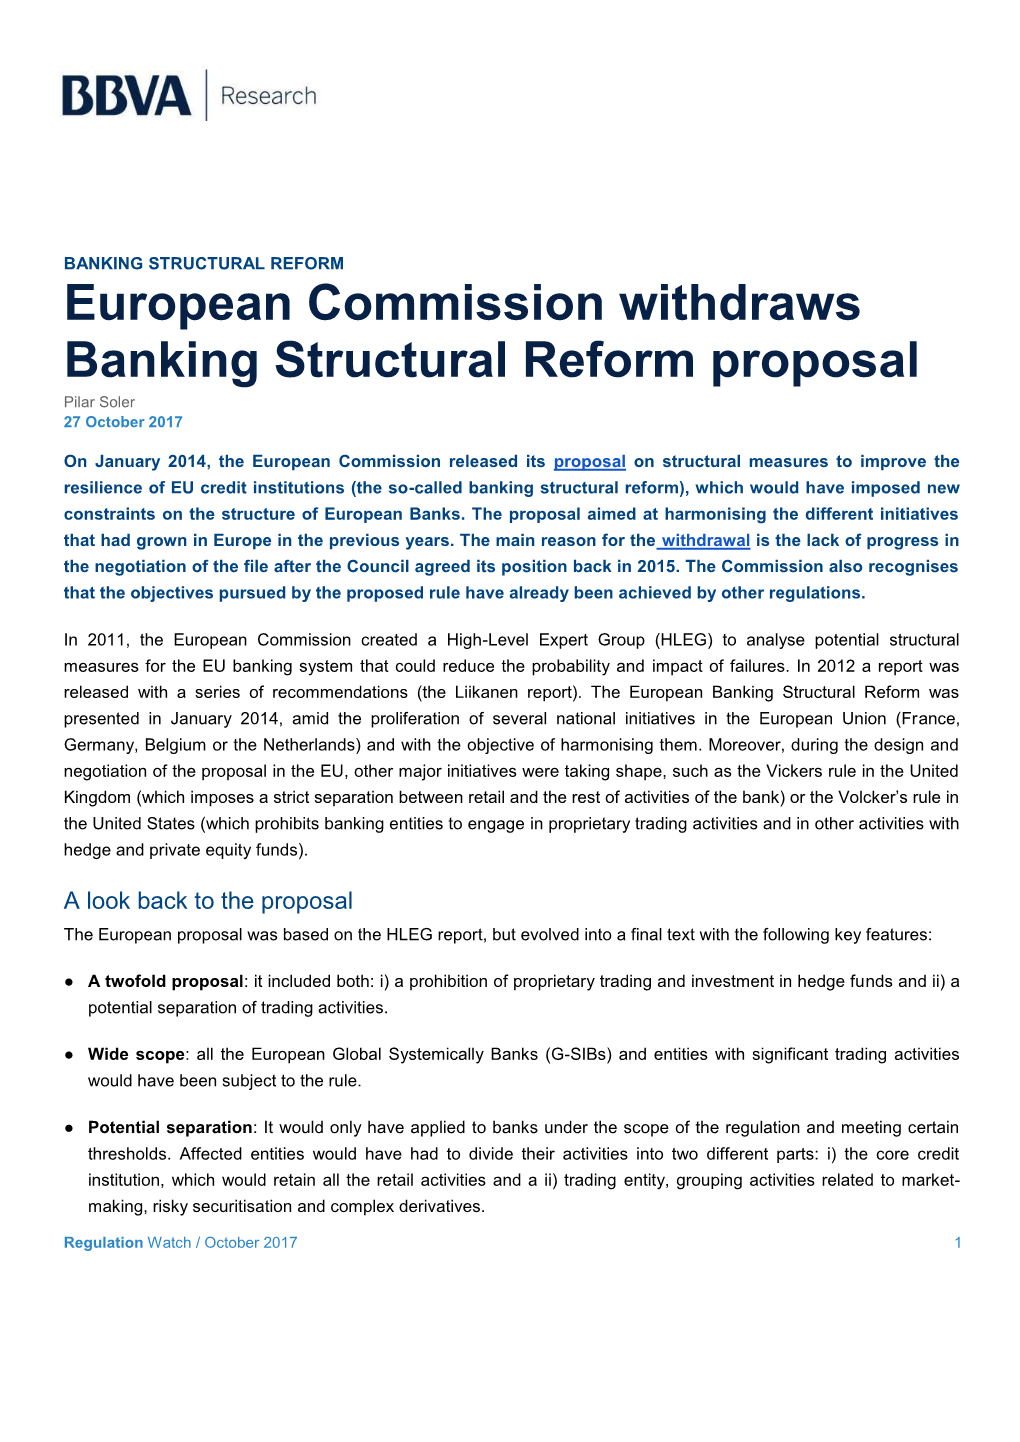 European Commission Withdraws Banking Structural Reform Proposal Pilar Soler 27 October 2017